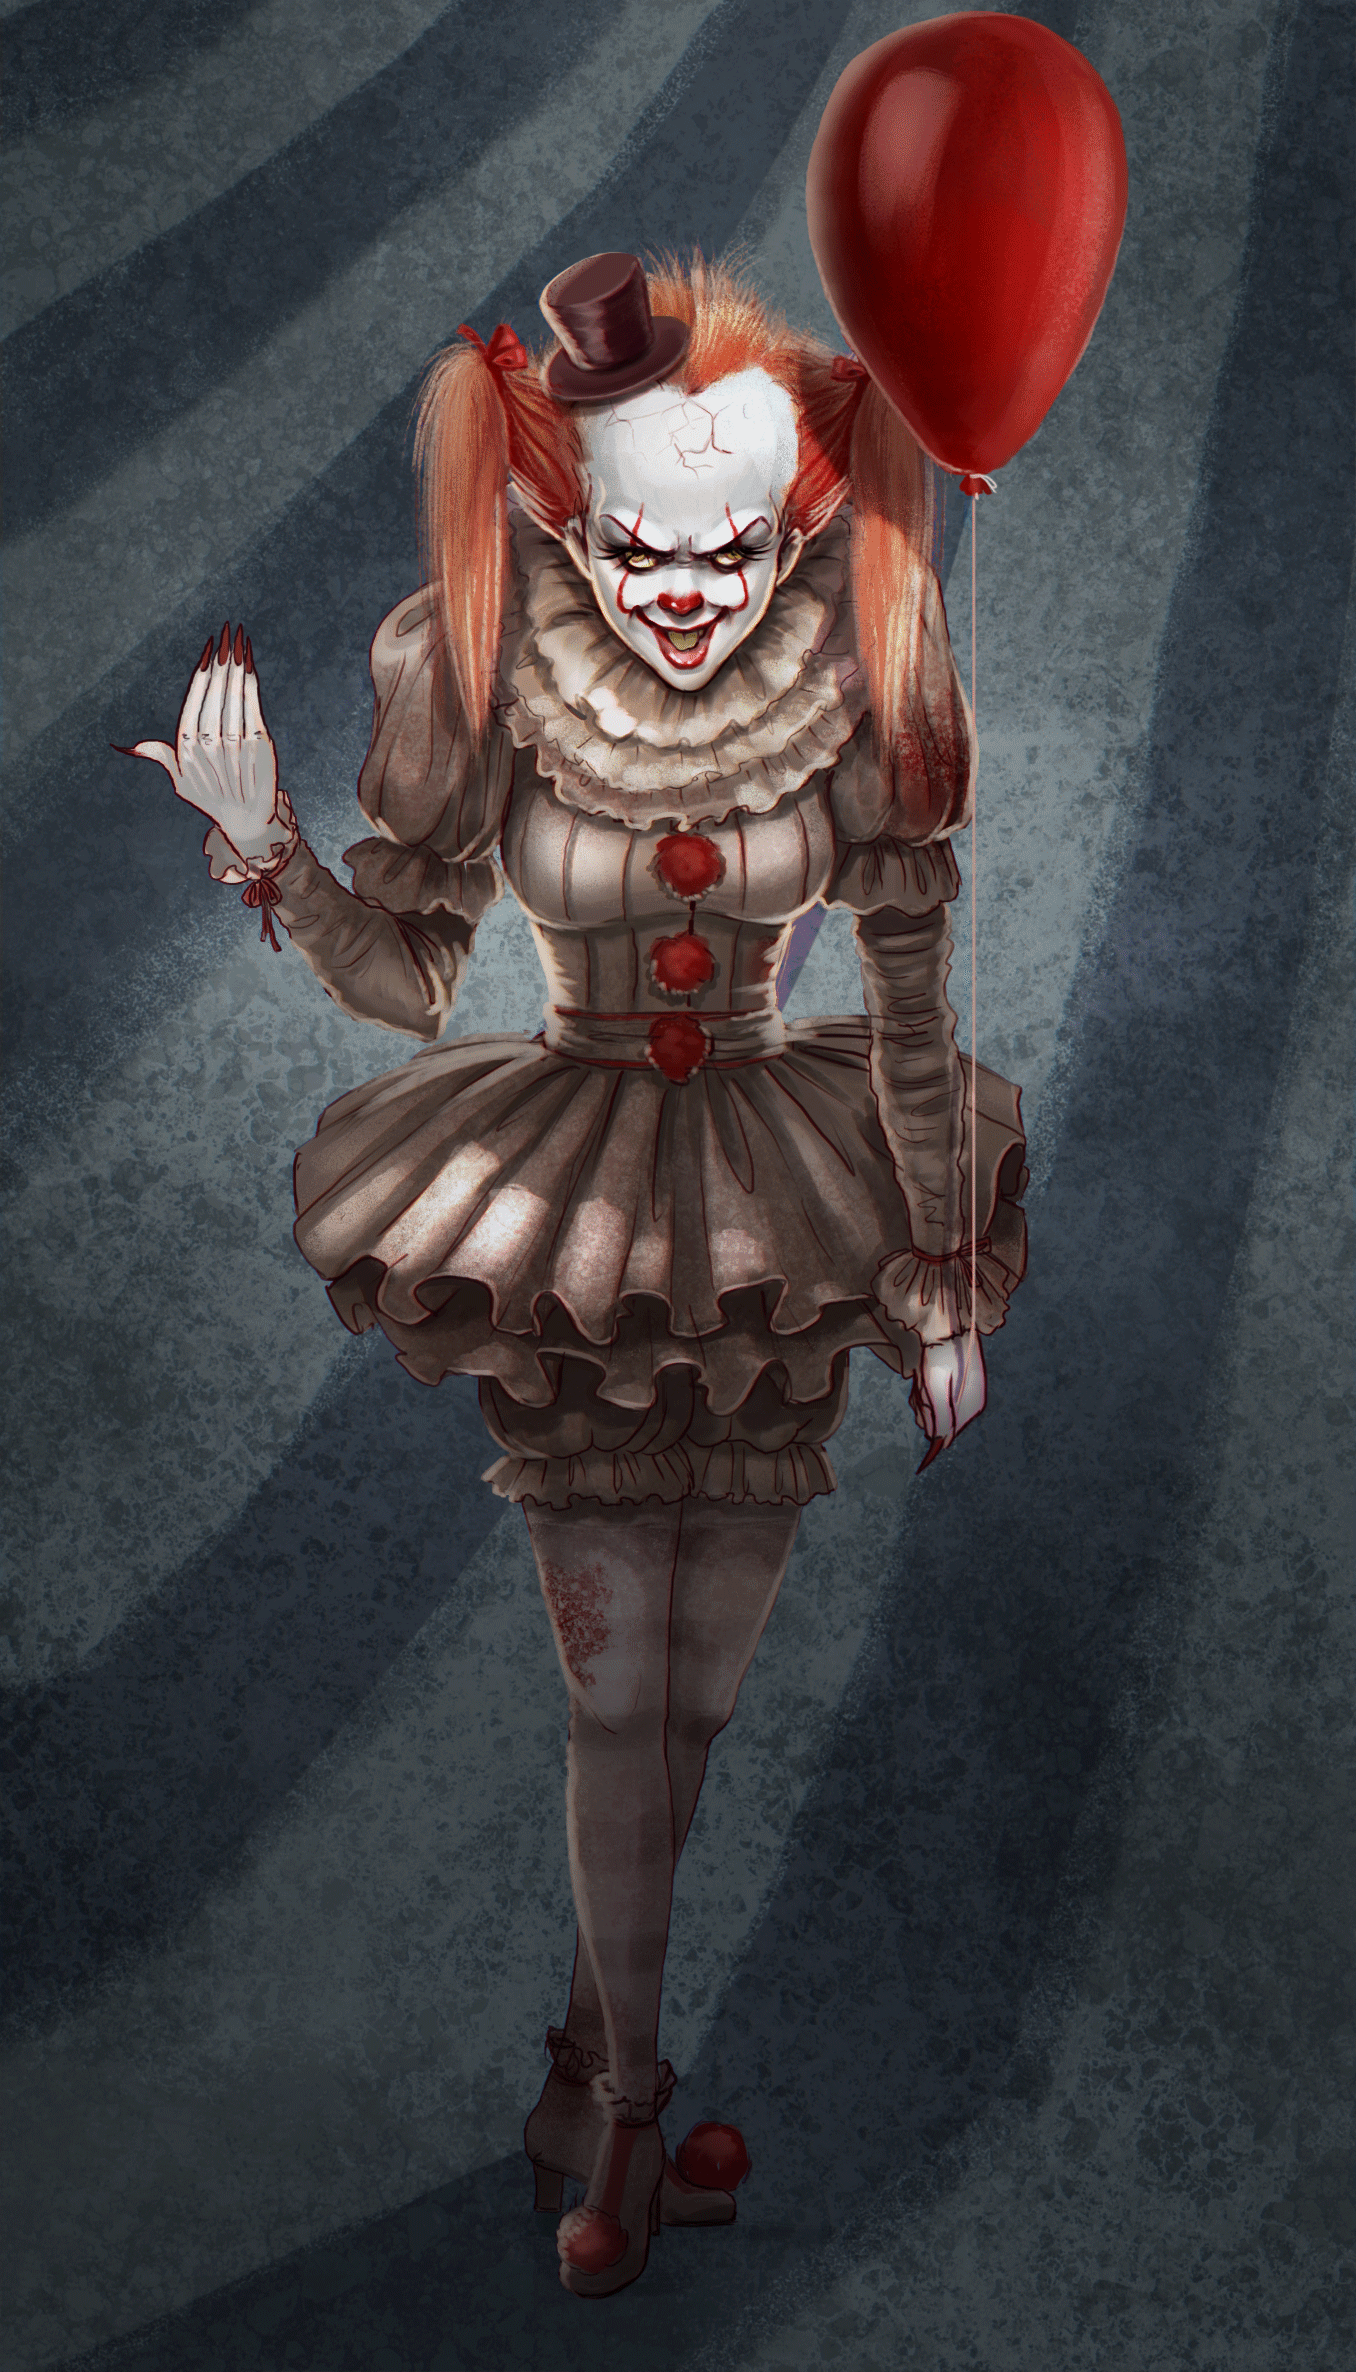 PENNYWISE the Dancing Clown from 'IT' Speedpaint